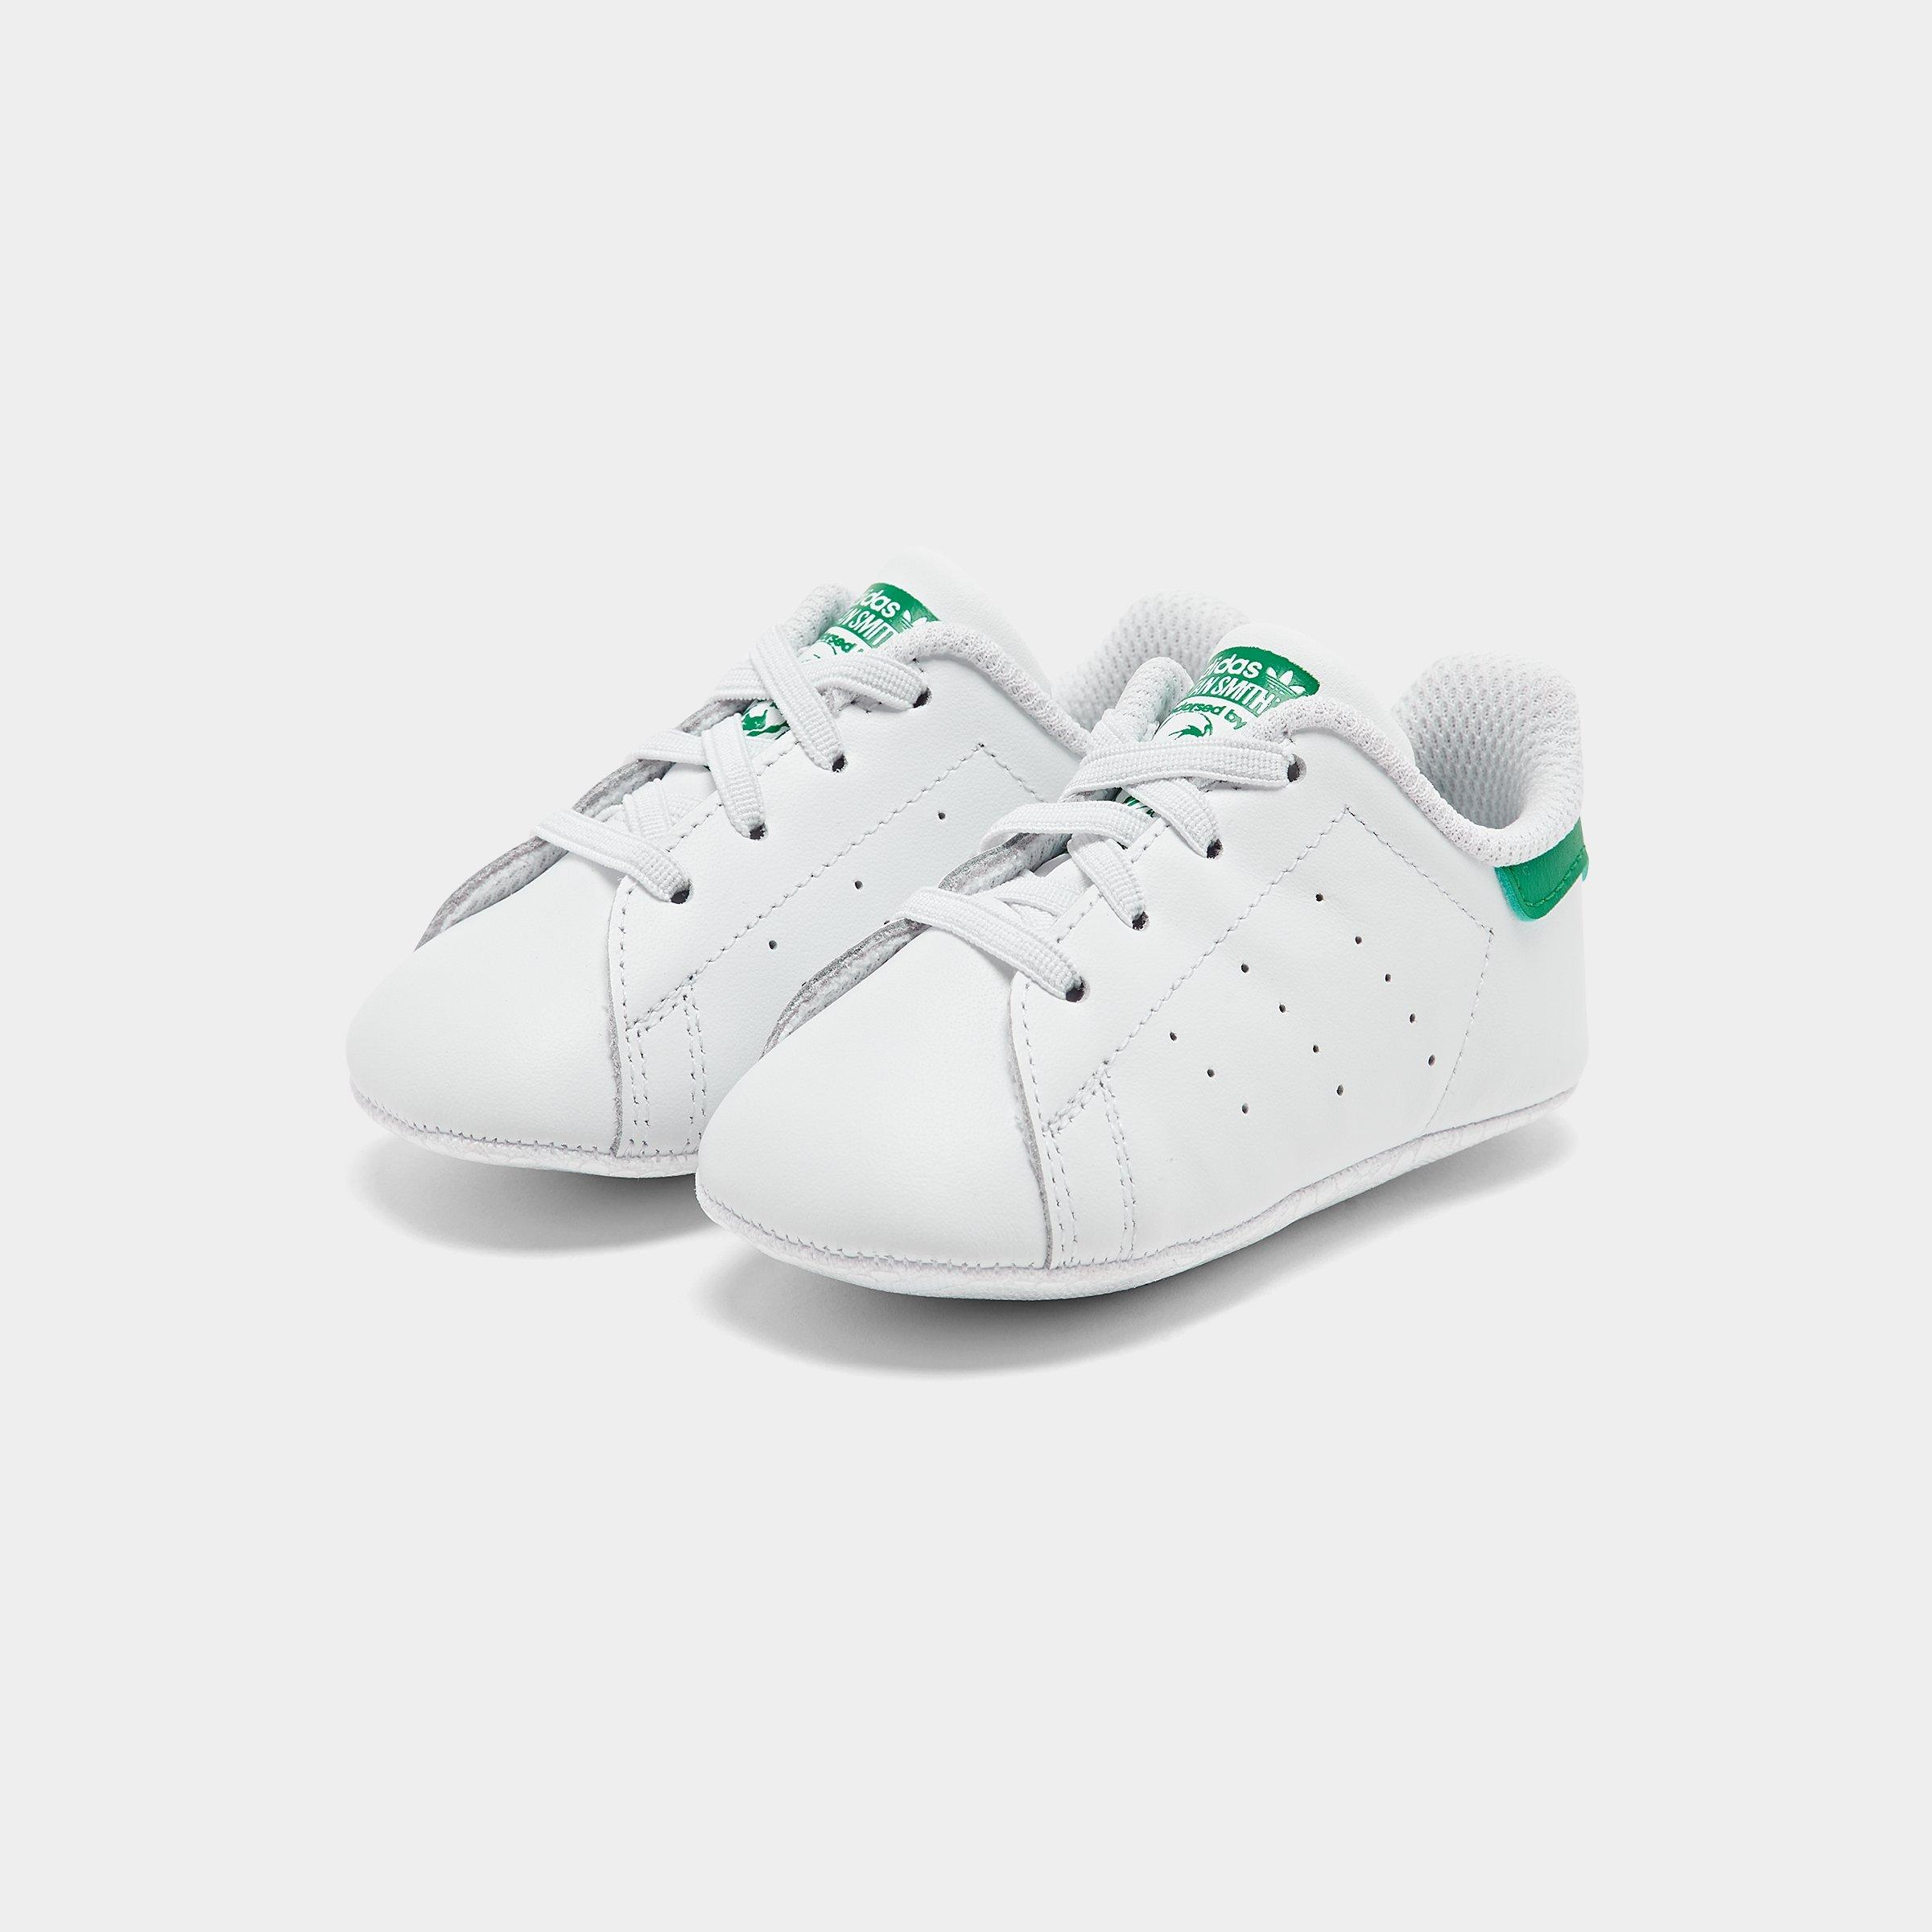 stan smith baby shoes